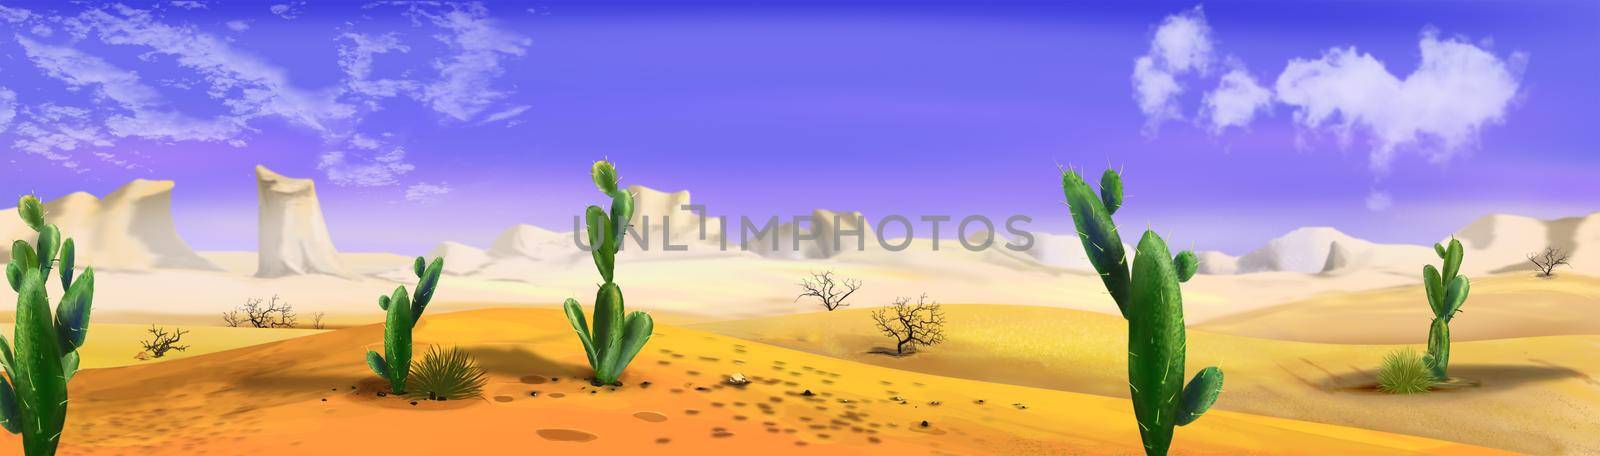 Cacti in the desert landscape on a sunny day. Digital Painting Background, Illustration.